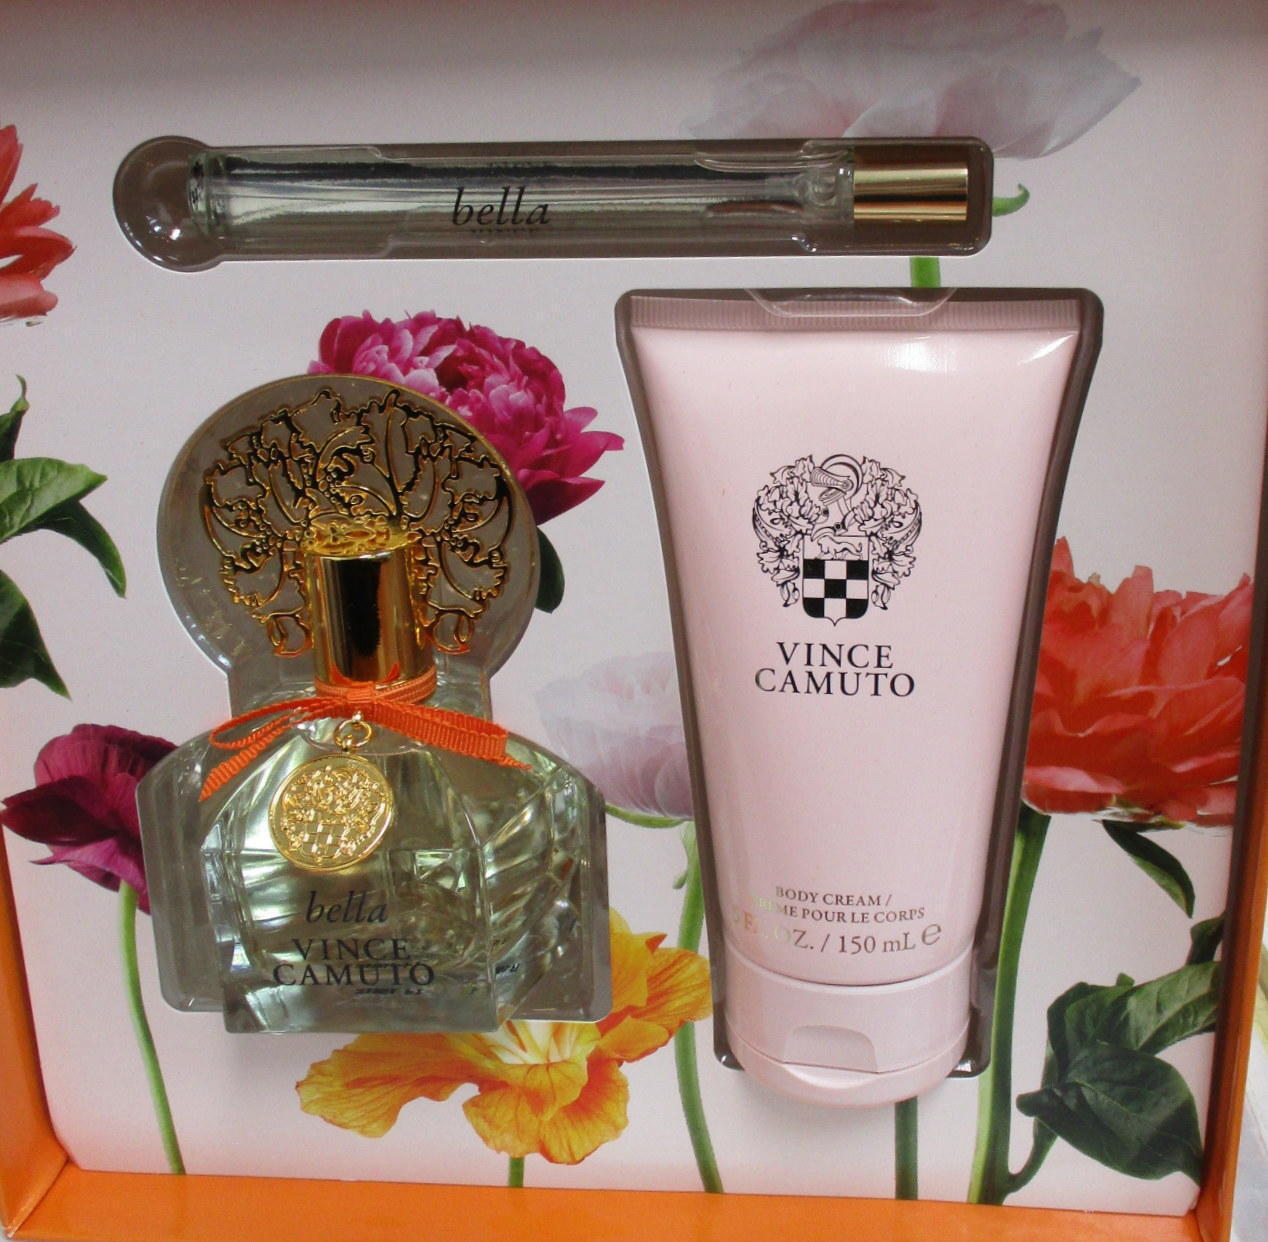 Vince Camuto Amore Perfume Body Lotion Set Womens Ladies